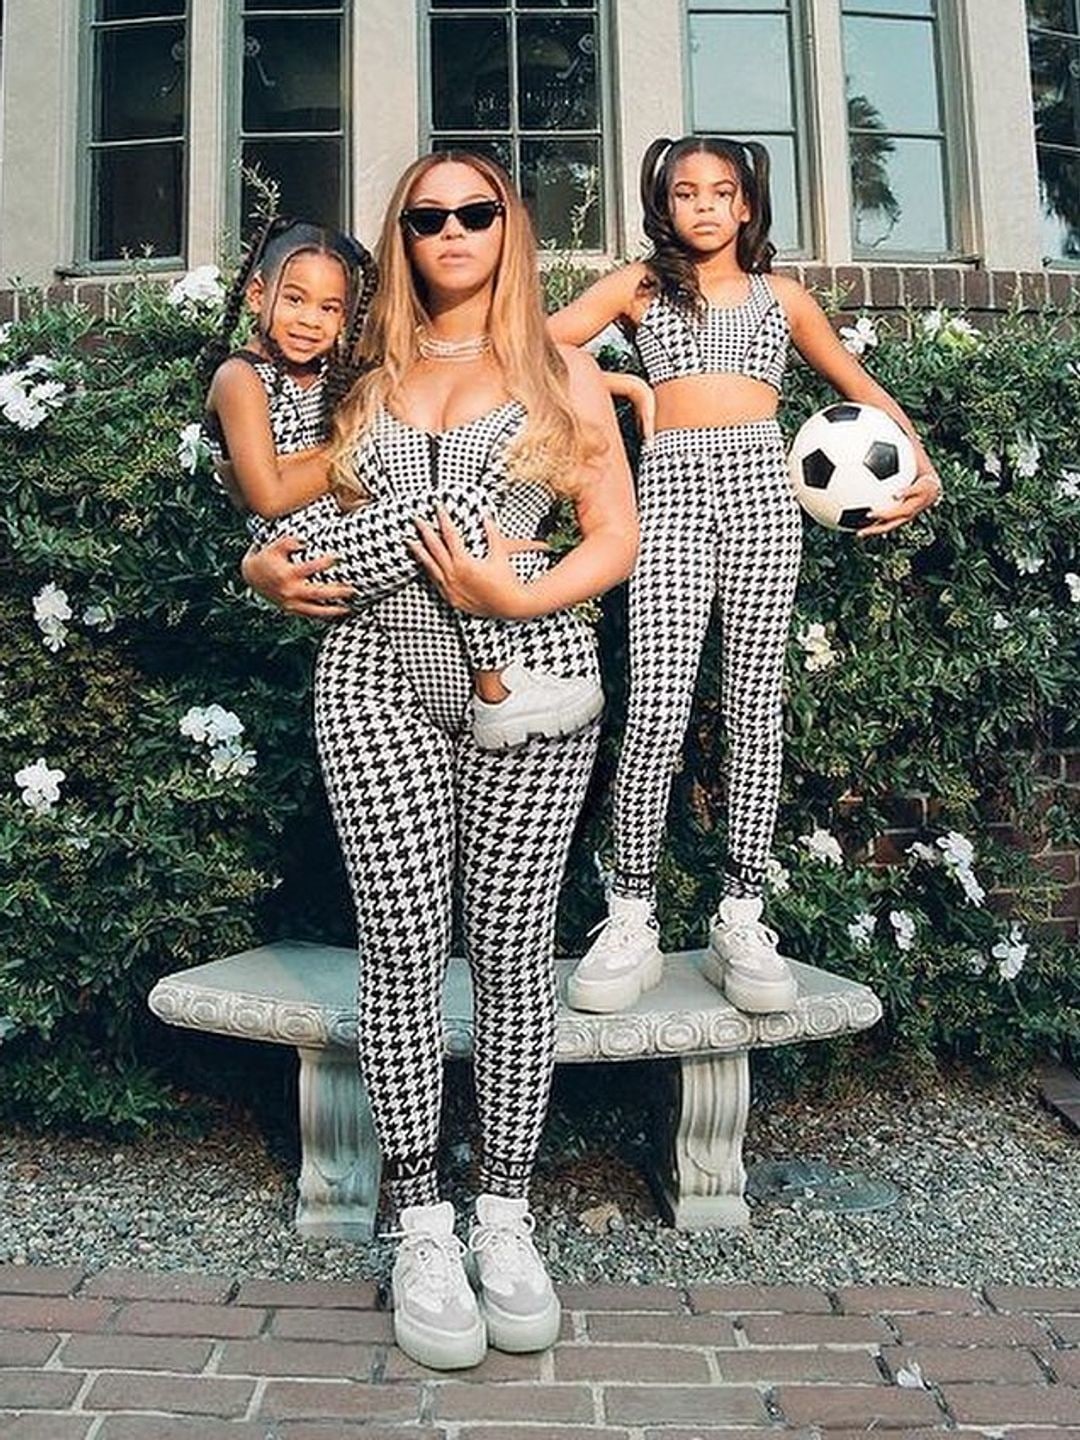 Beyonce stood in a garden with Rumi in her arms and Blue Ivy stood with a soccer ball behind her